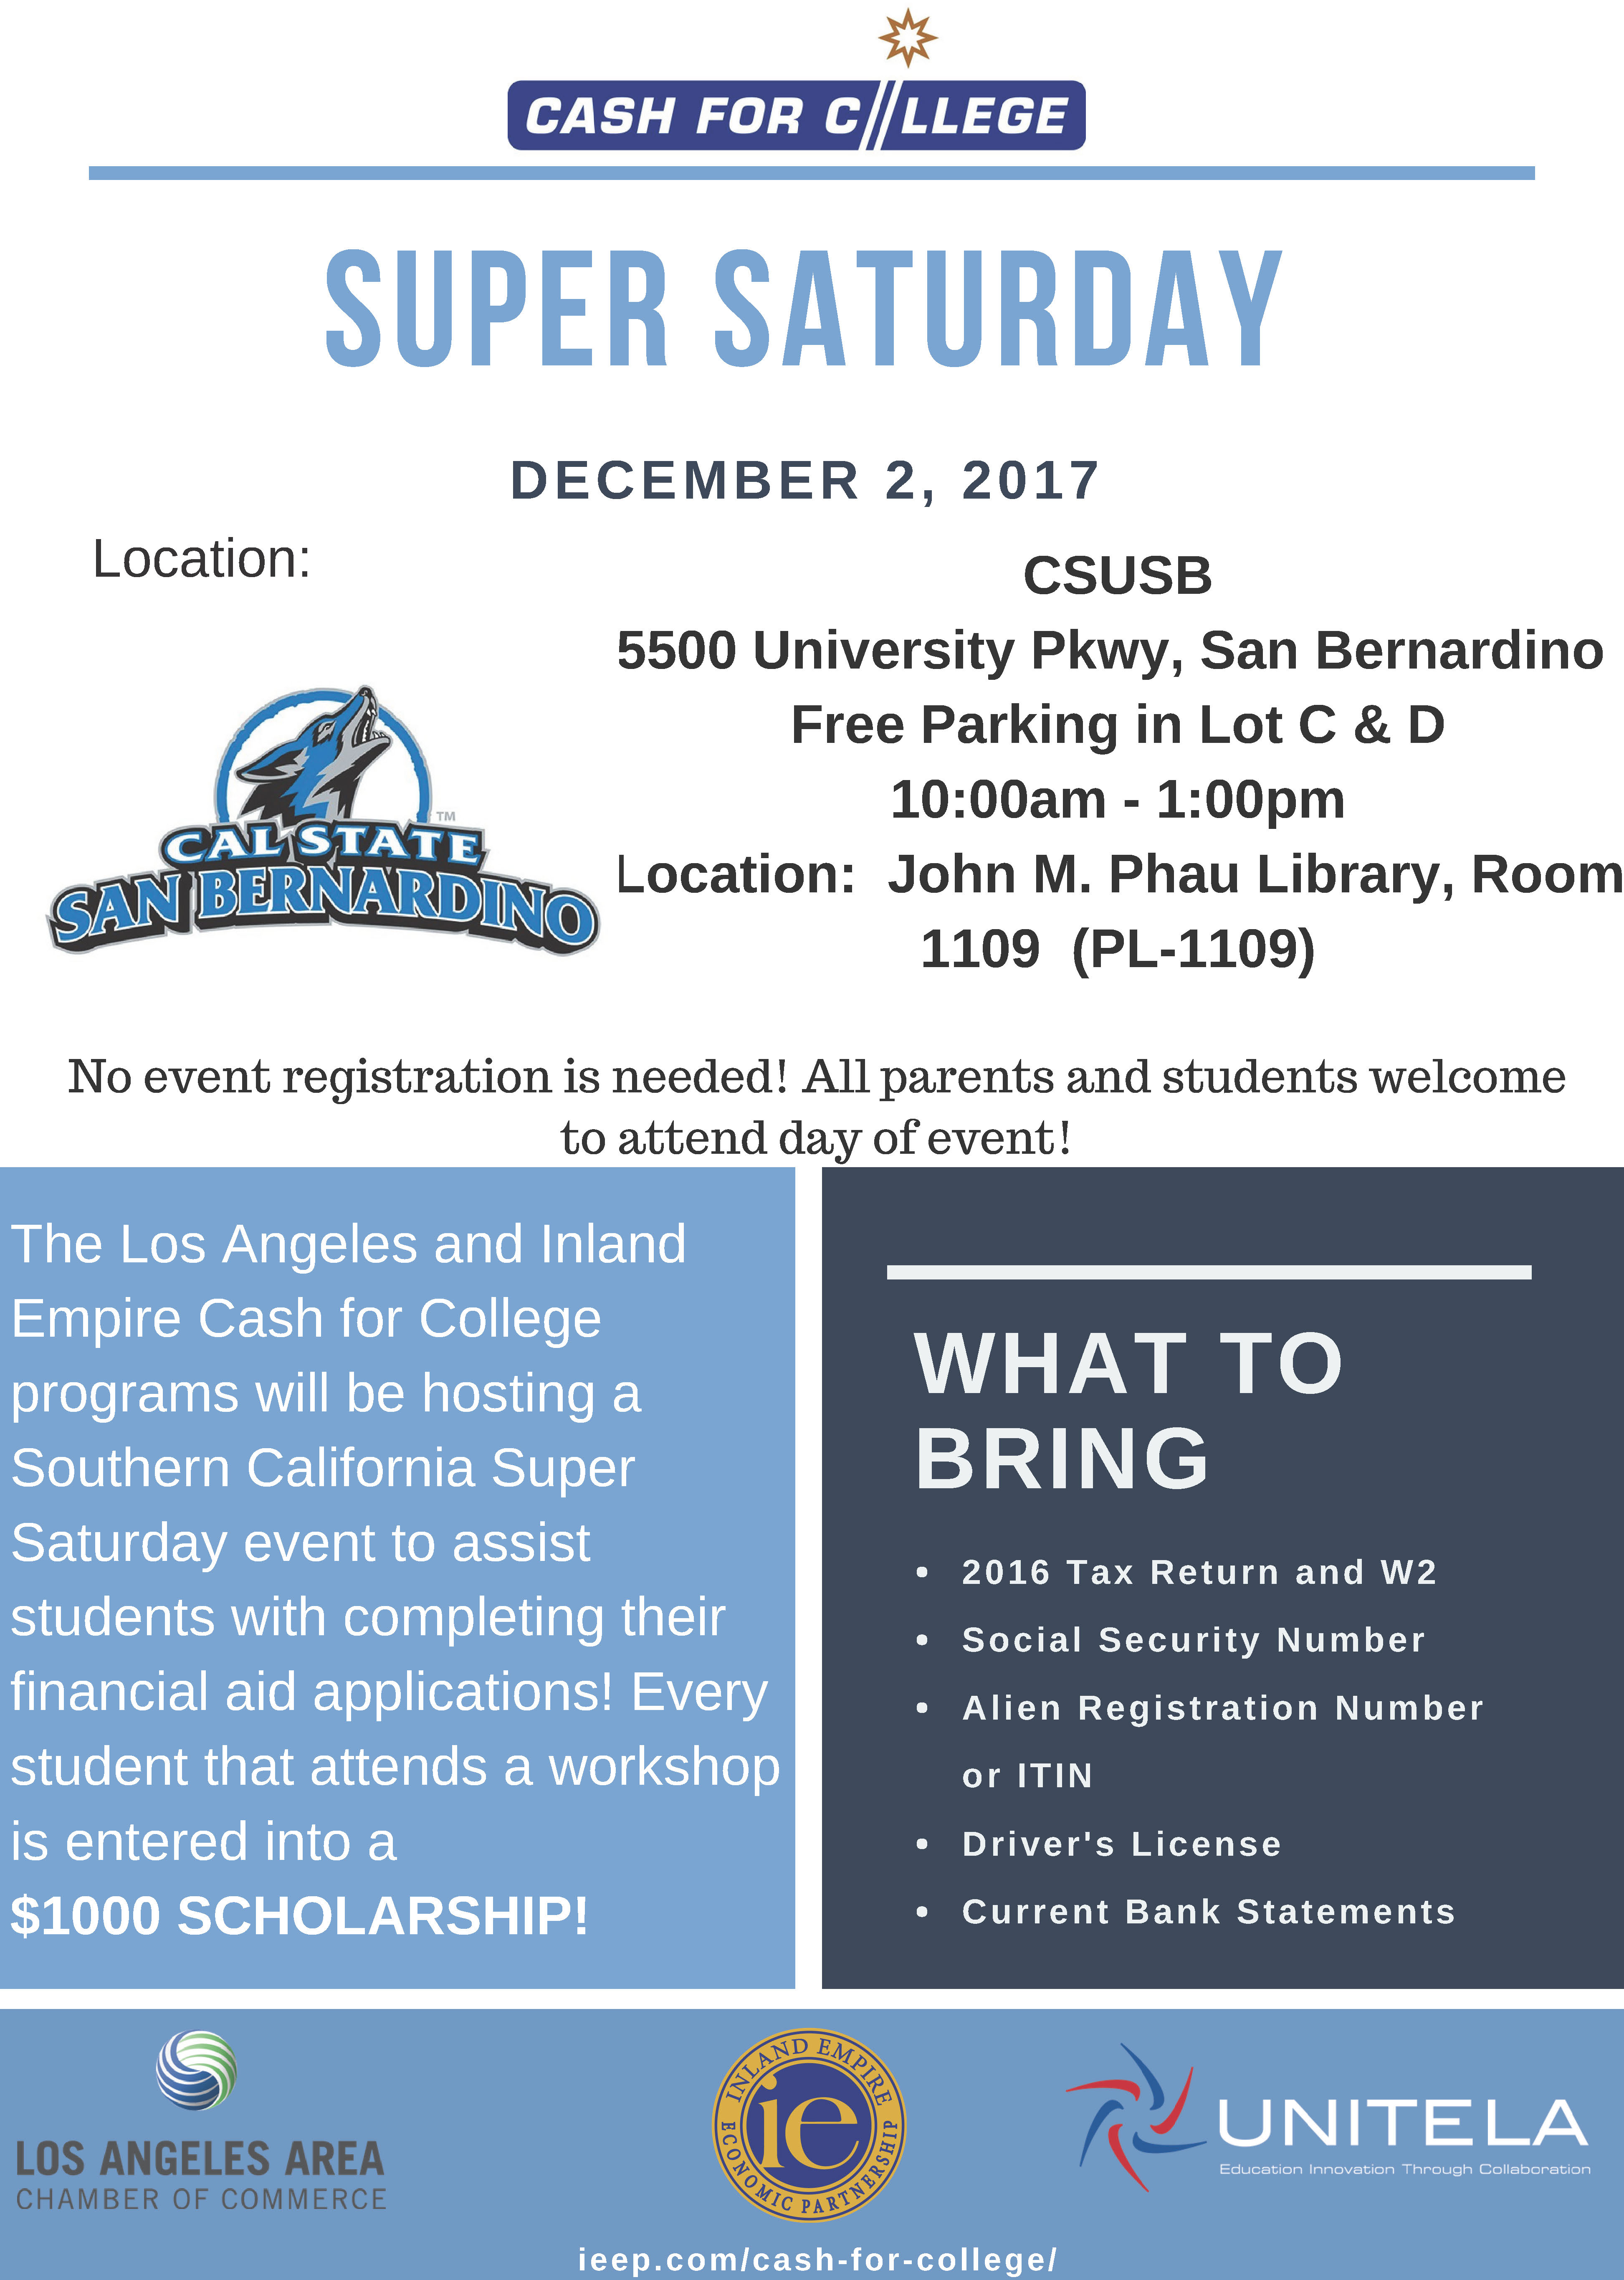 Cal State San Bernardino will be one of the hosts of “Super Saturday,” a free financial aid workshop for high school seniors, their parents and current college students, on Saturday, Dec. 2.